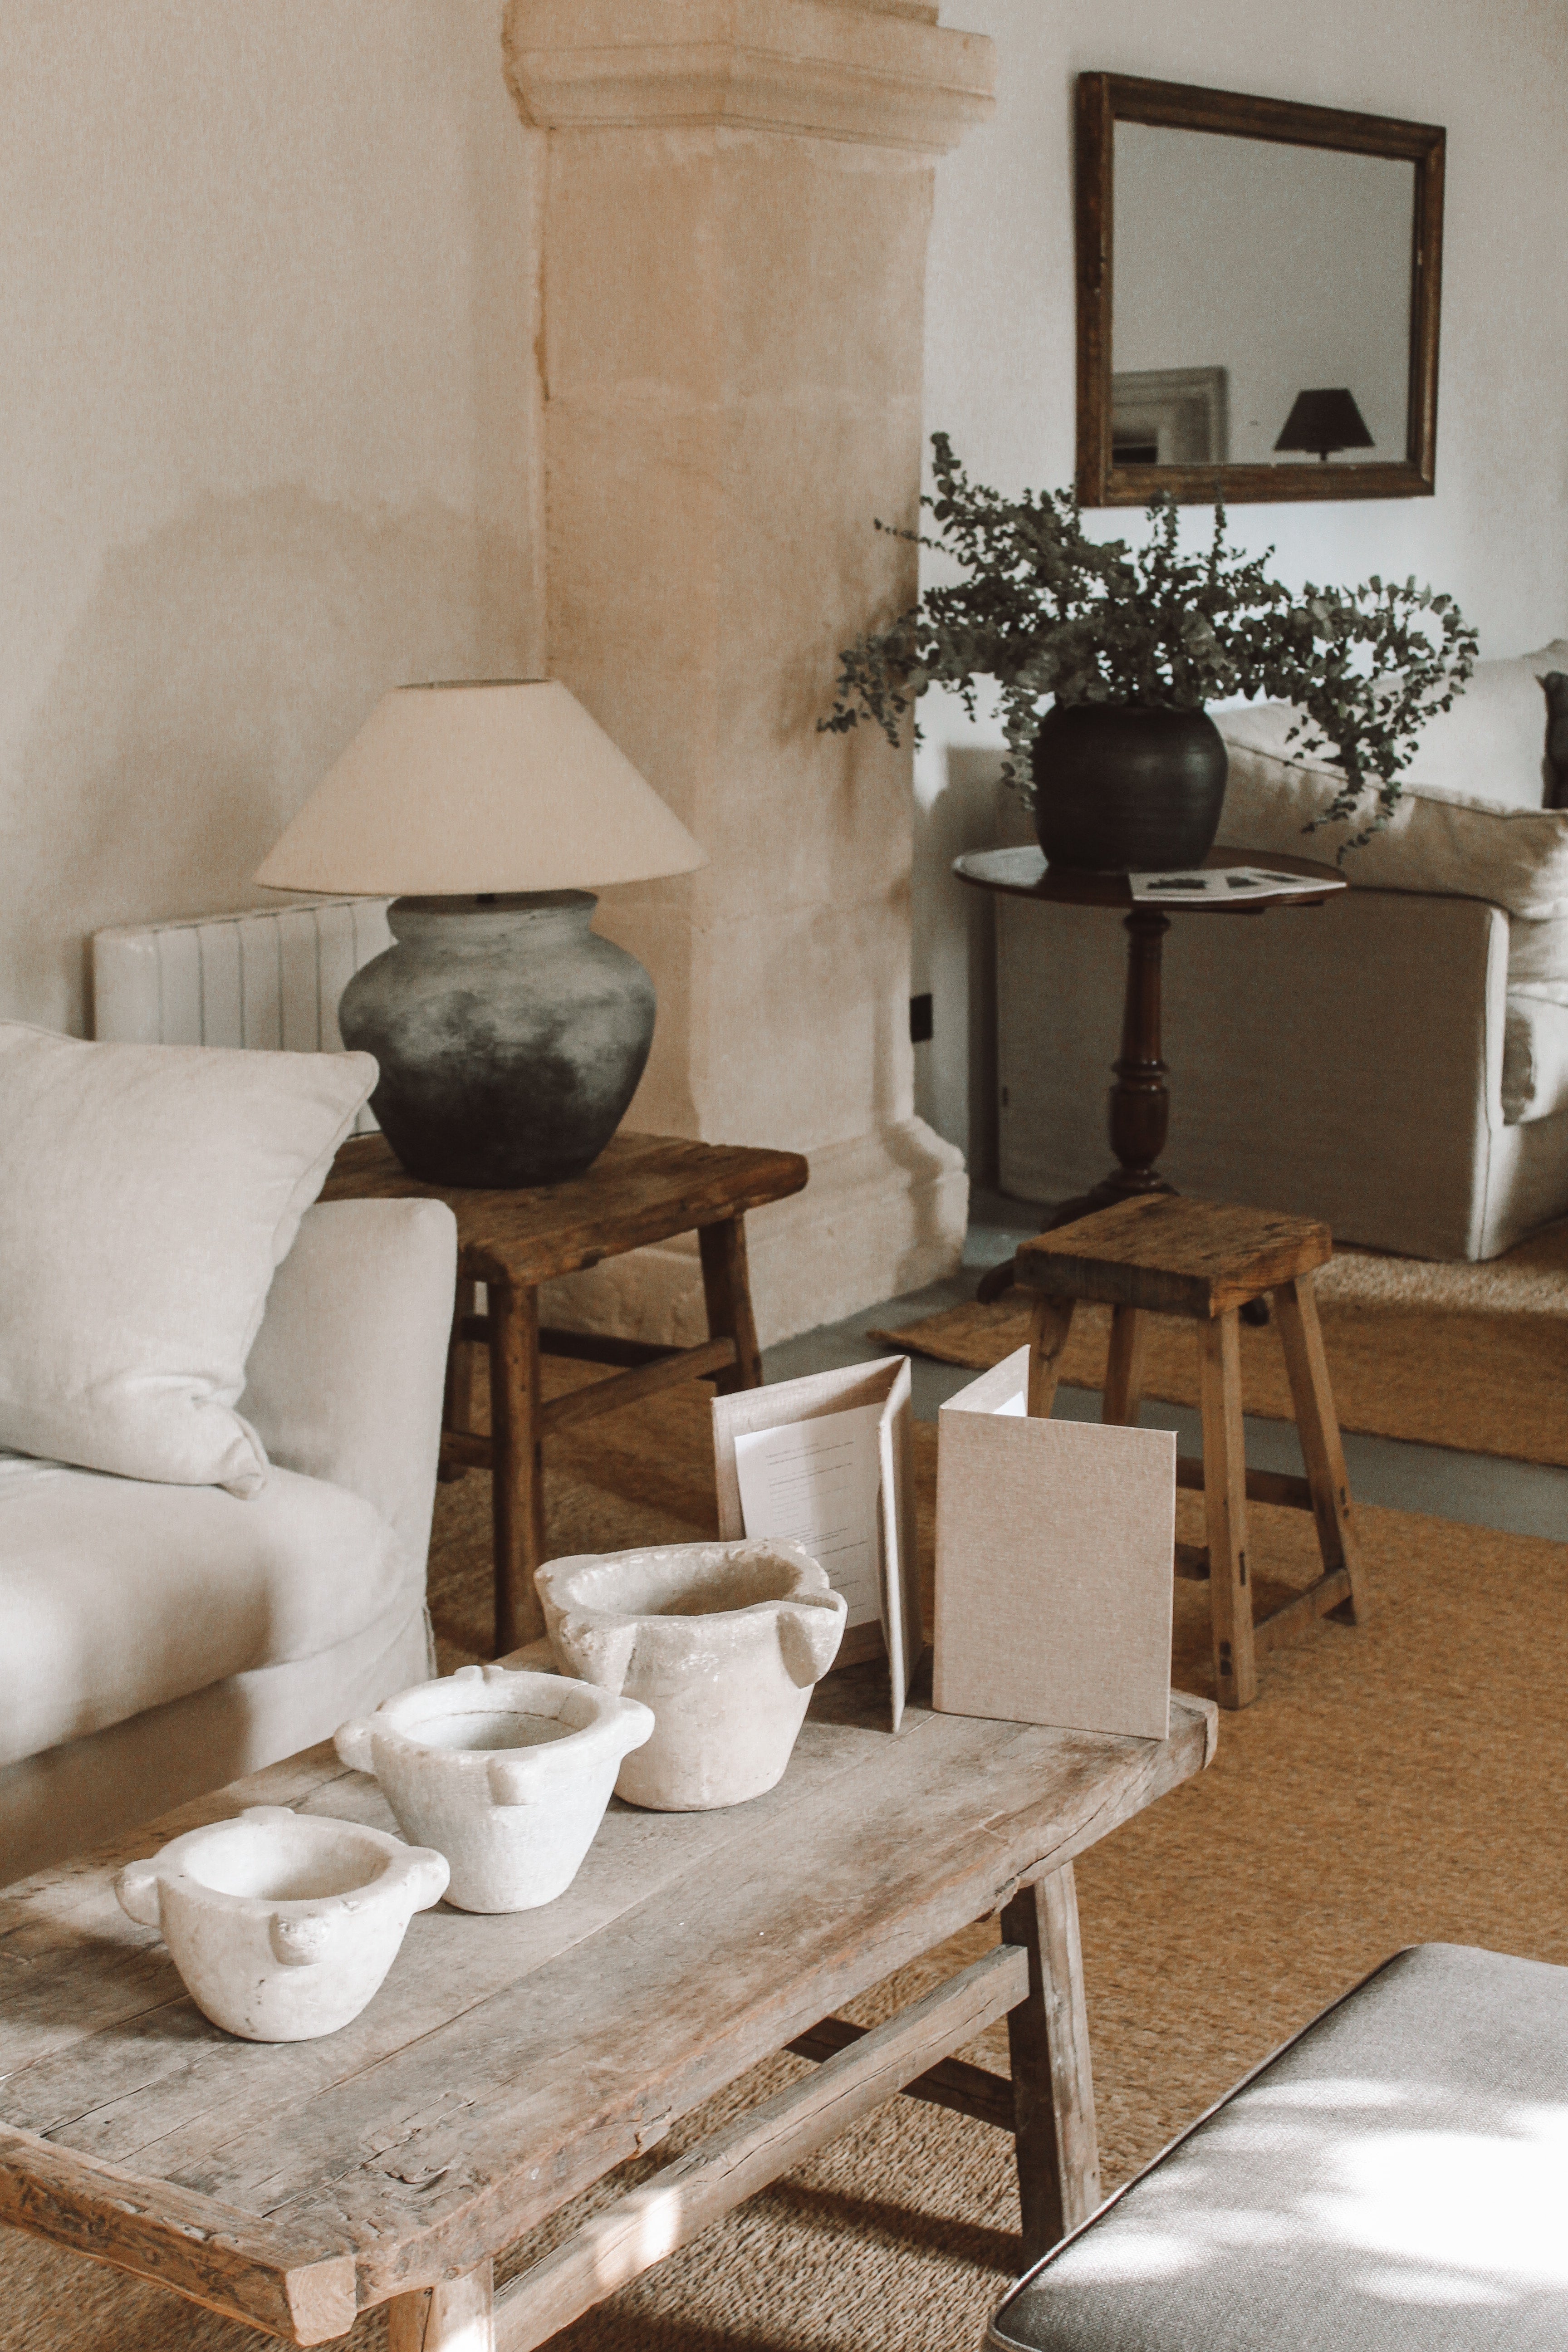 Welcome to Our Cozy Corner: Your New Home for Modern, Authentic Interior Lifestyle Pieces